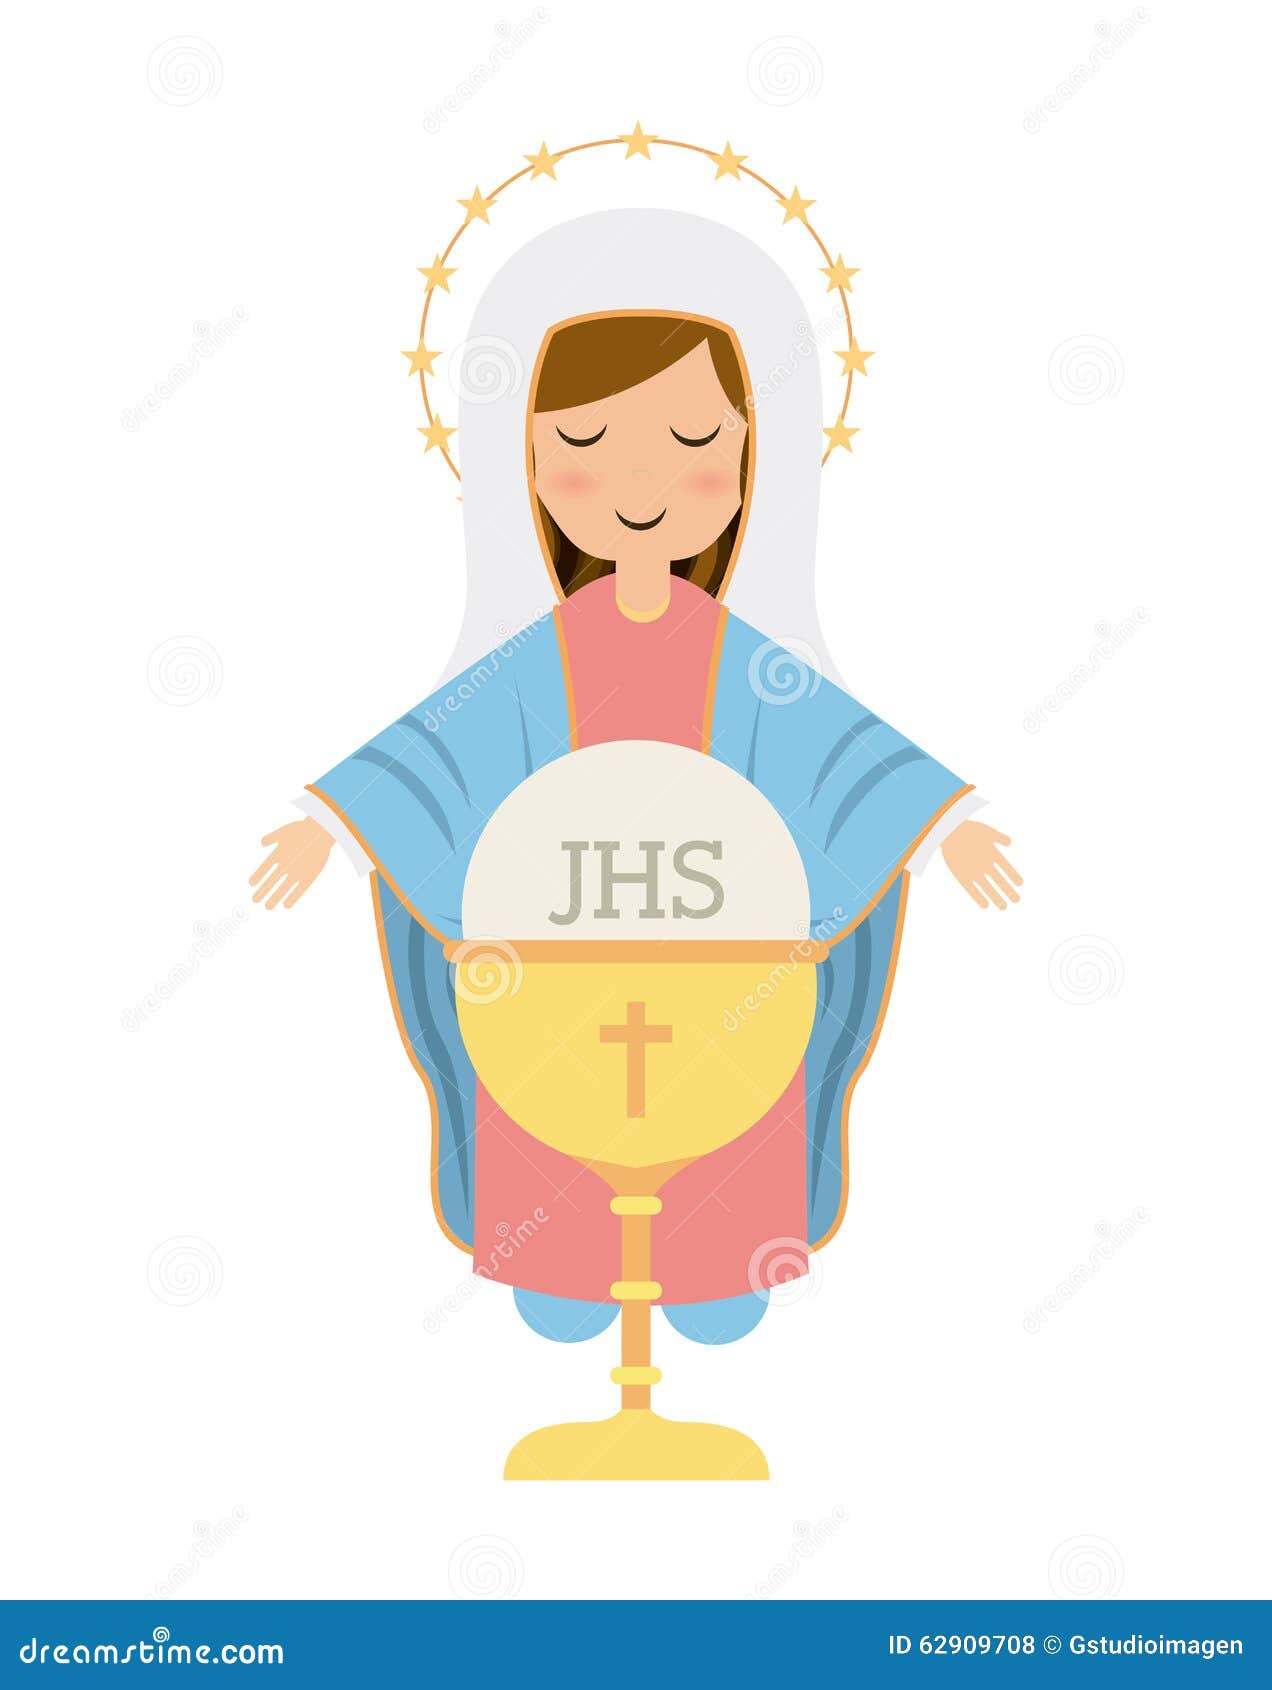 First communion design stock vector. Illustration of holy - 62909708